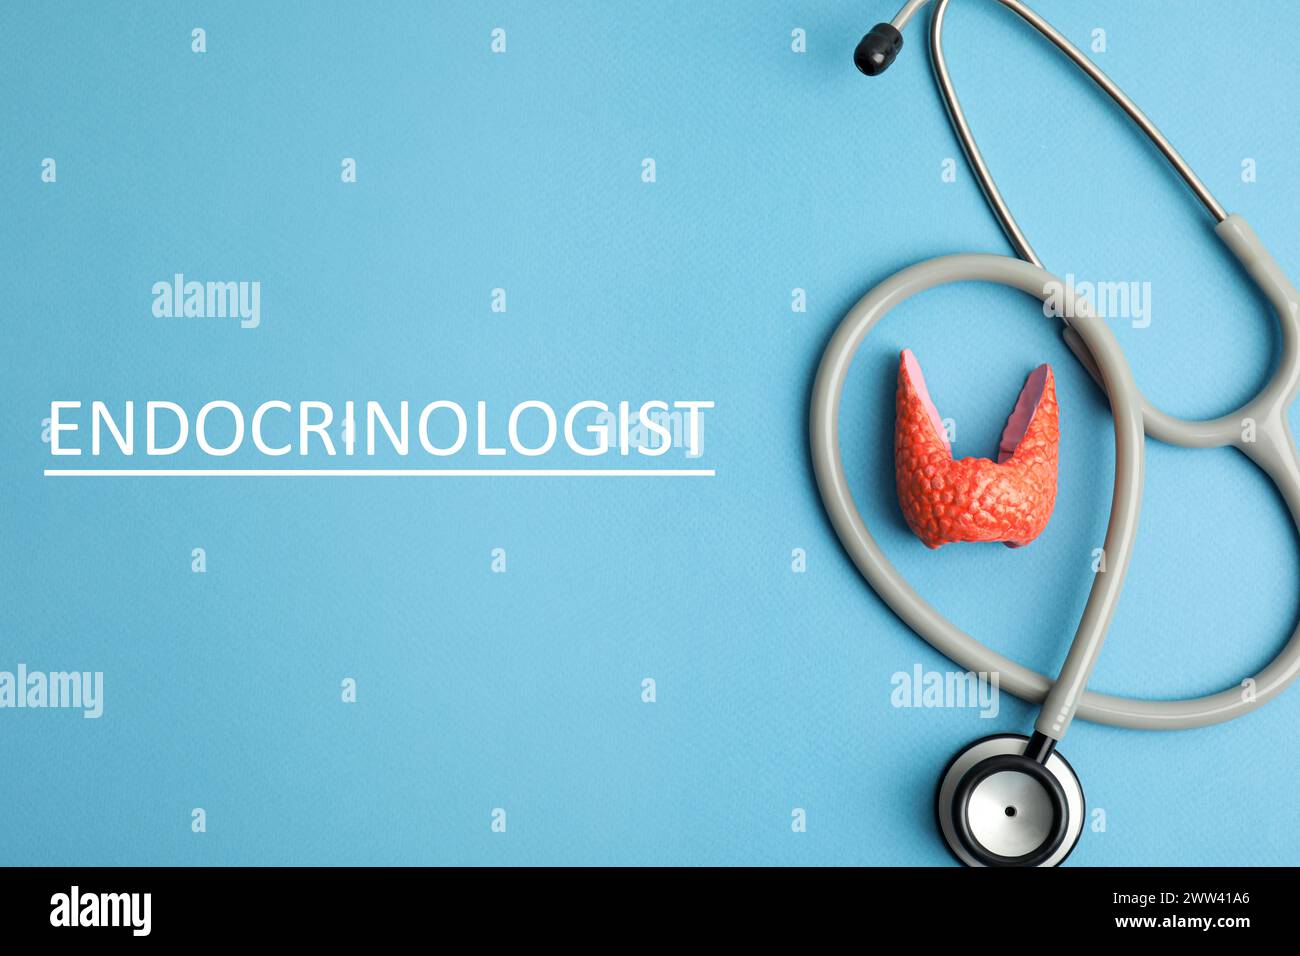 Endocrinologist. Model of thyroid gland and stethoscope on light blue background, top view Stock Photo